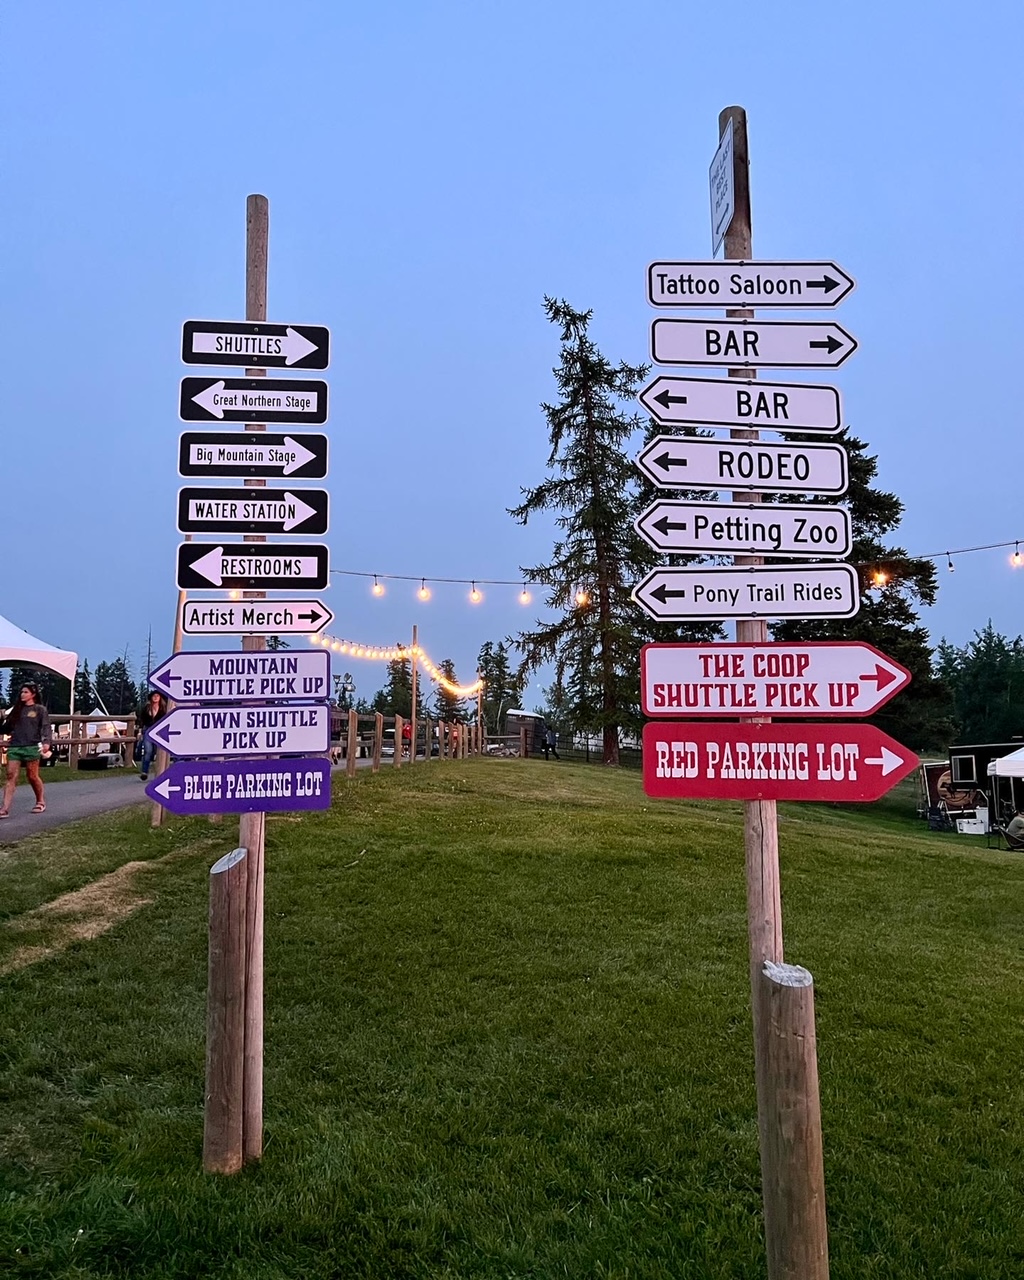 Plenty of directions to find your way around at Under the Big Sky Fest.